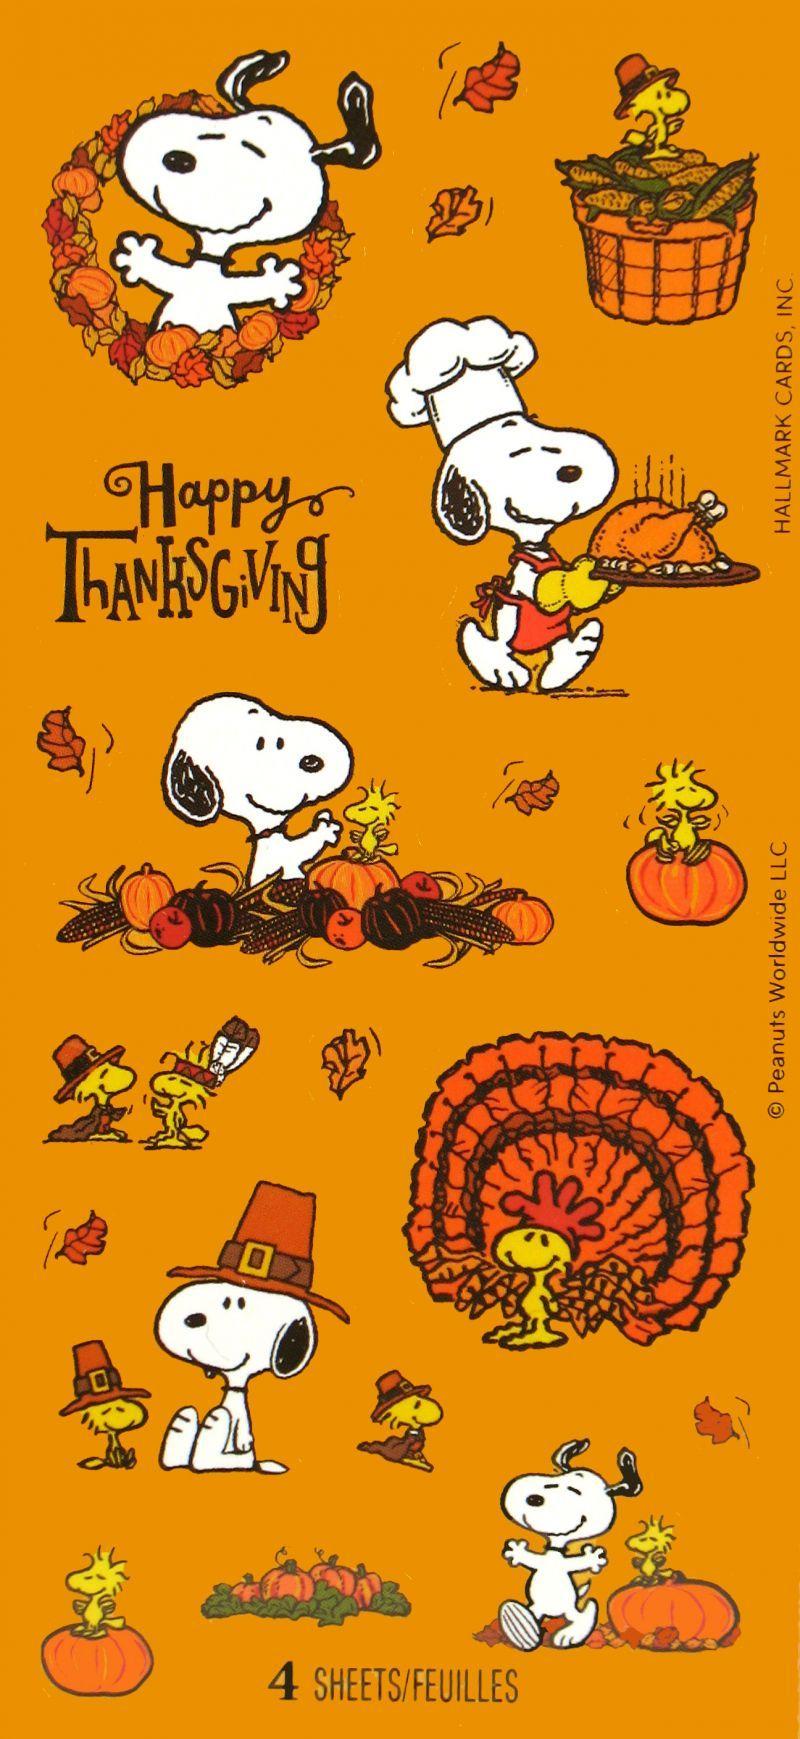 Snoopy wallpaper, Thanksgiving snoopy, Peanuts thanksgiving